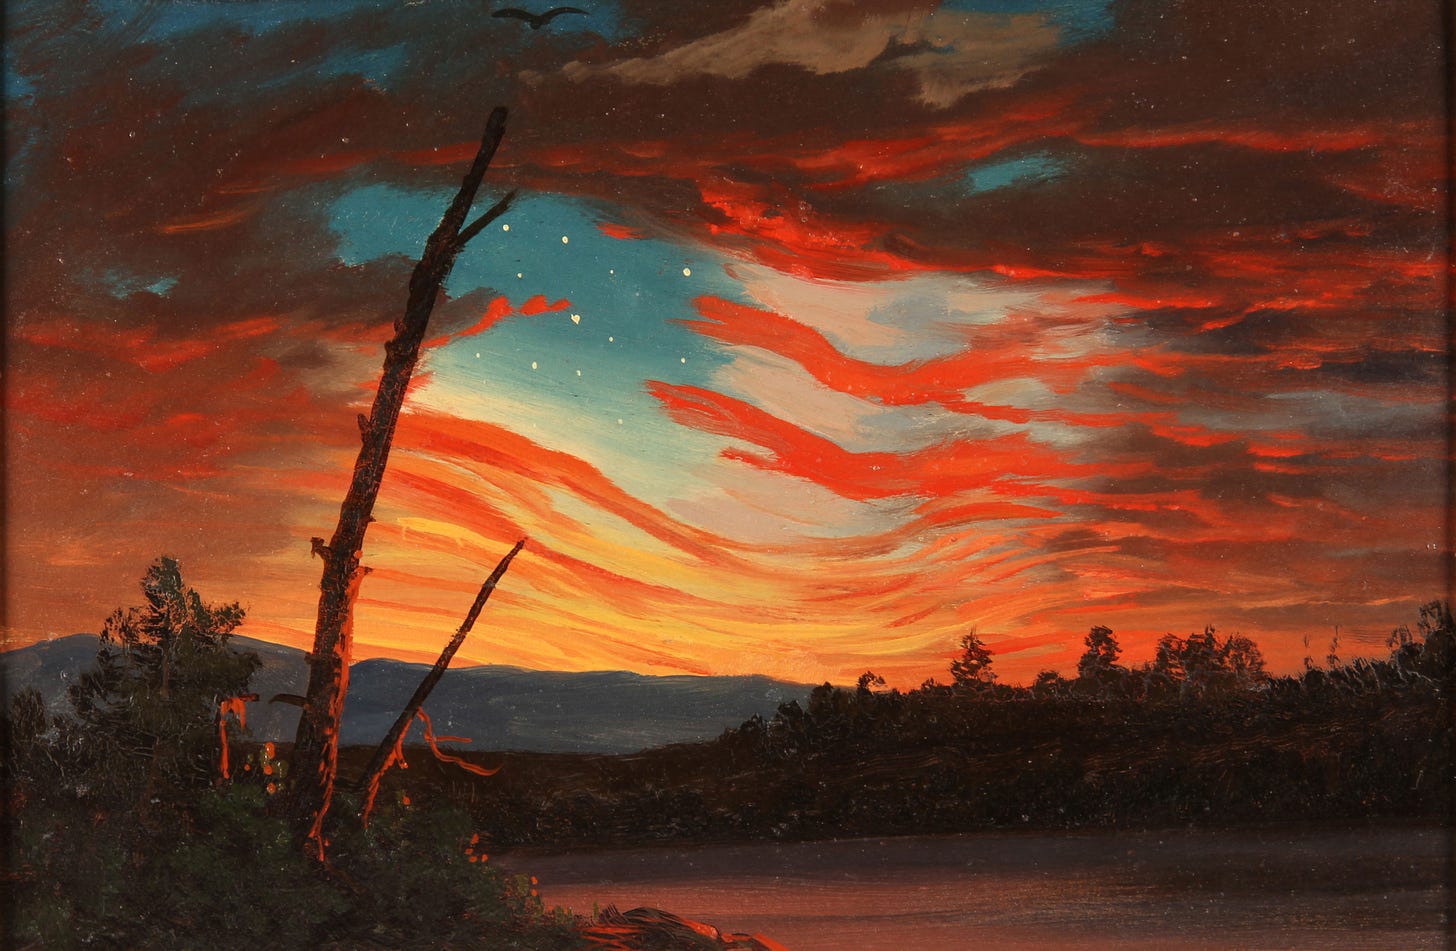 File:Our Banner in the Sky by Frederic Edwin Church.jpg - Wikimedia Commons